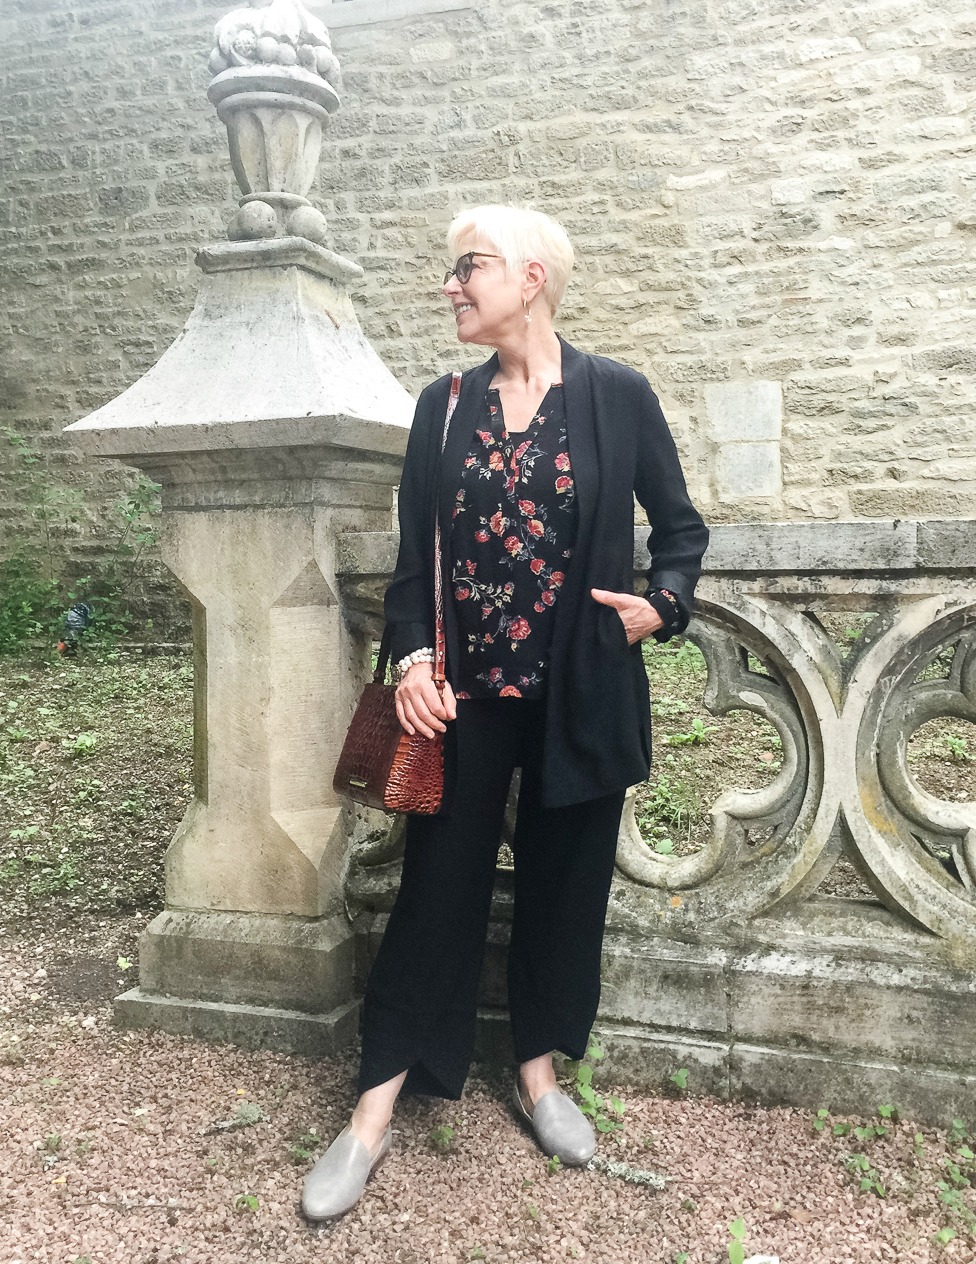 Working my travel wardrobe: dressed for dinner. Details at une femme d'un certain age.